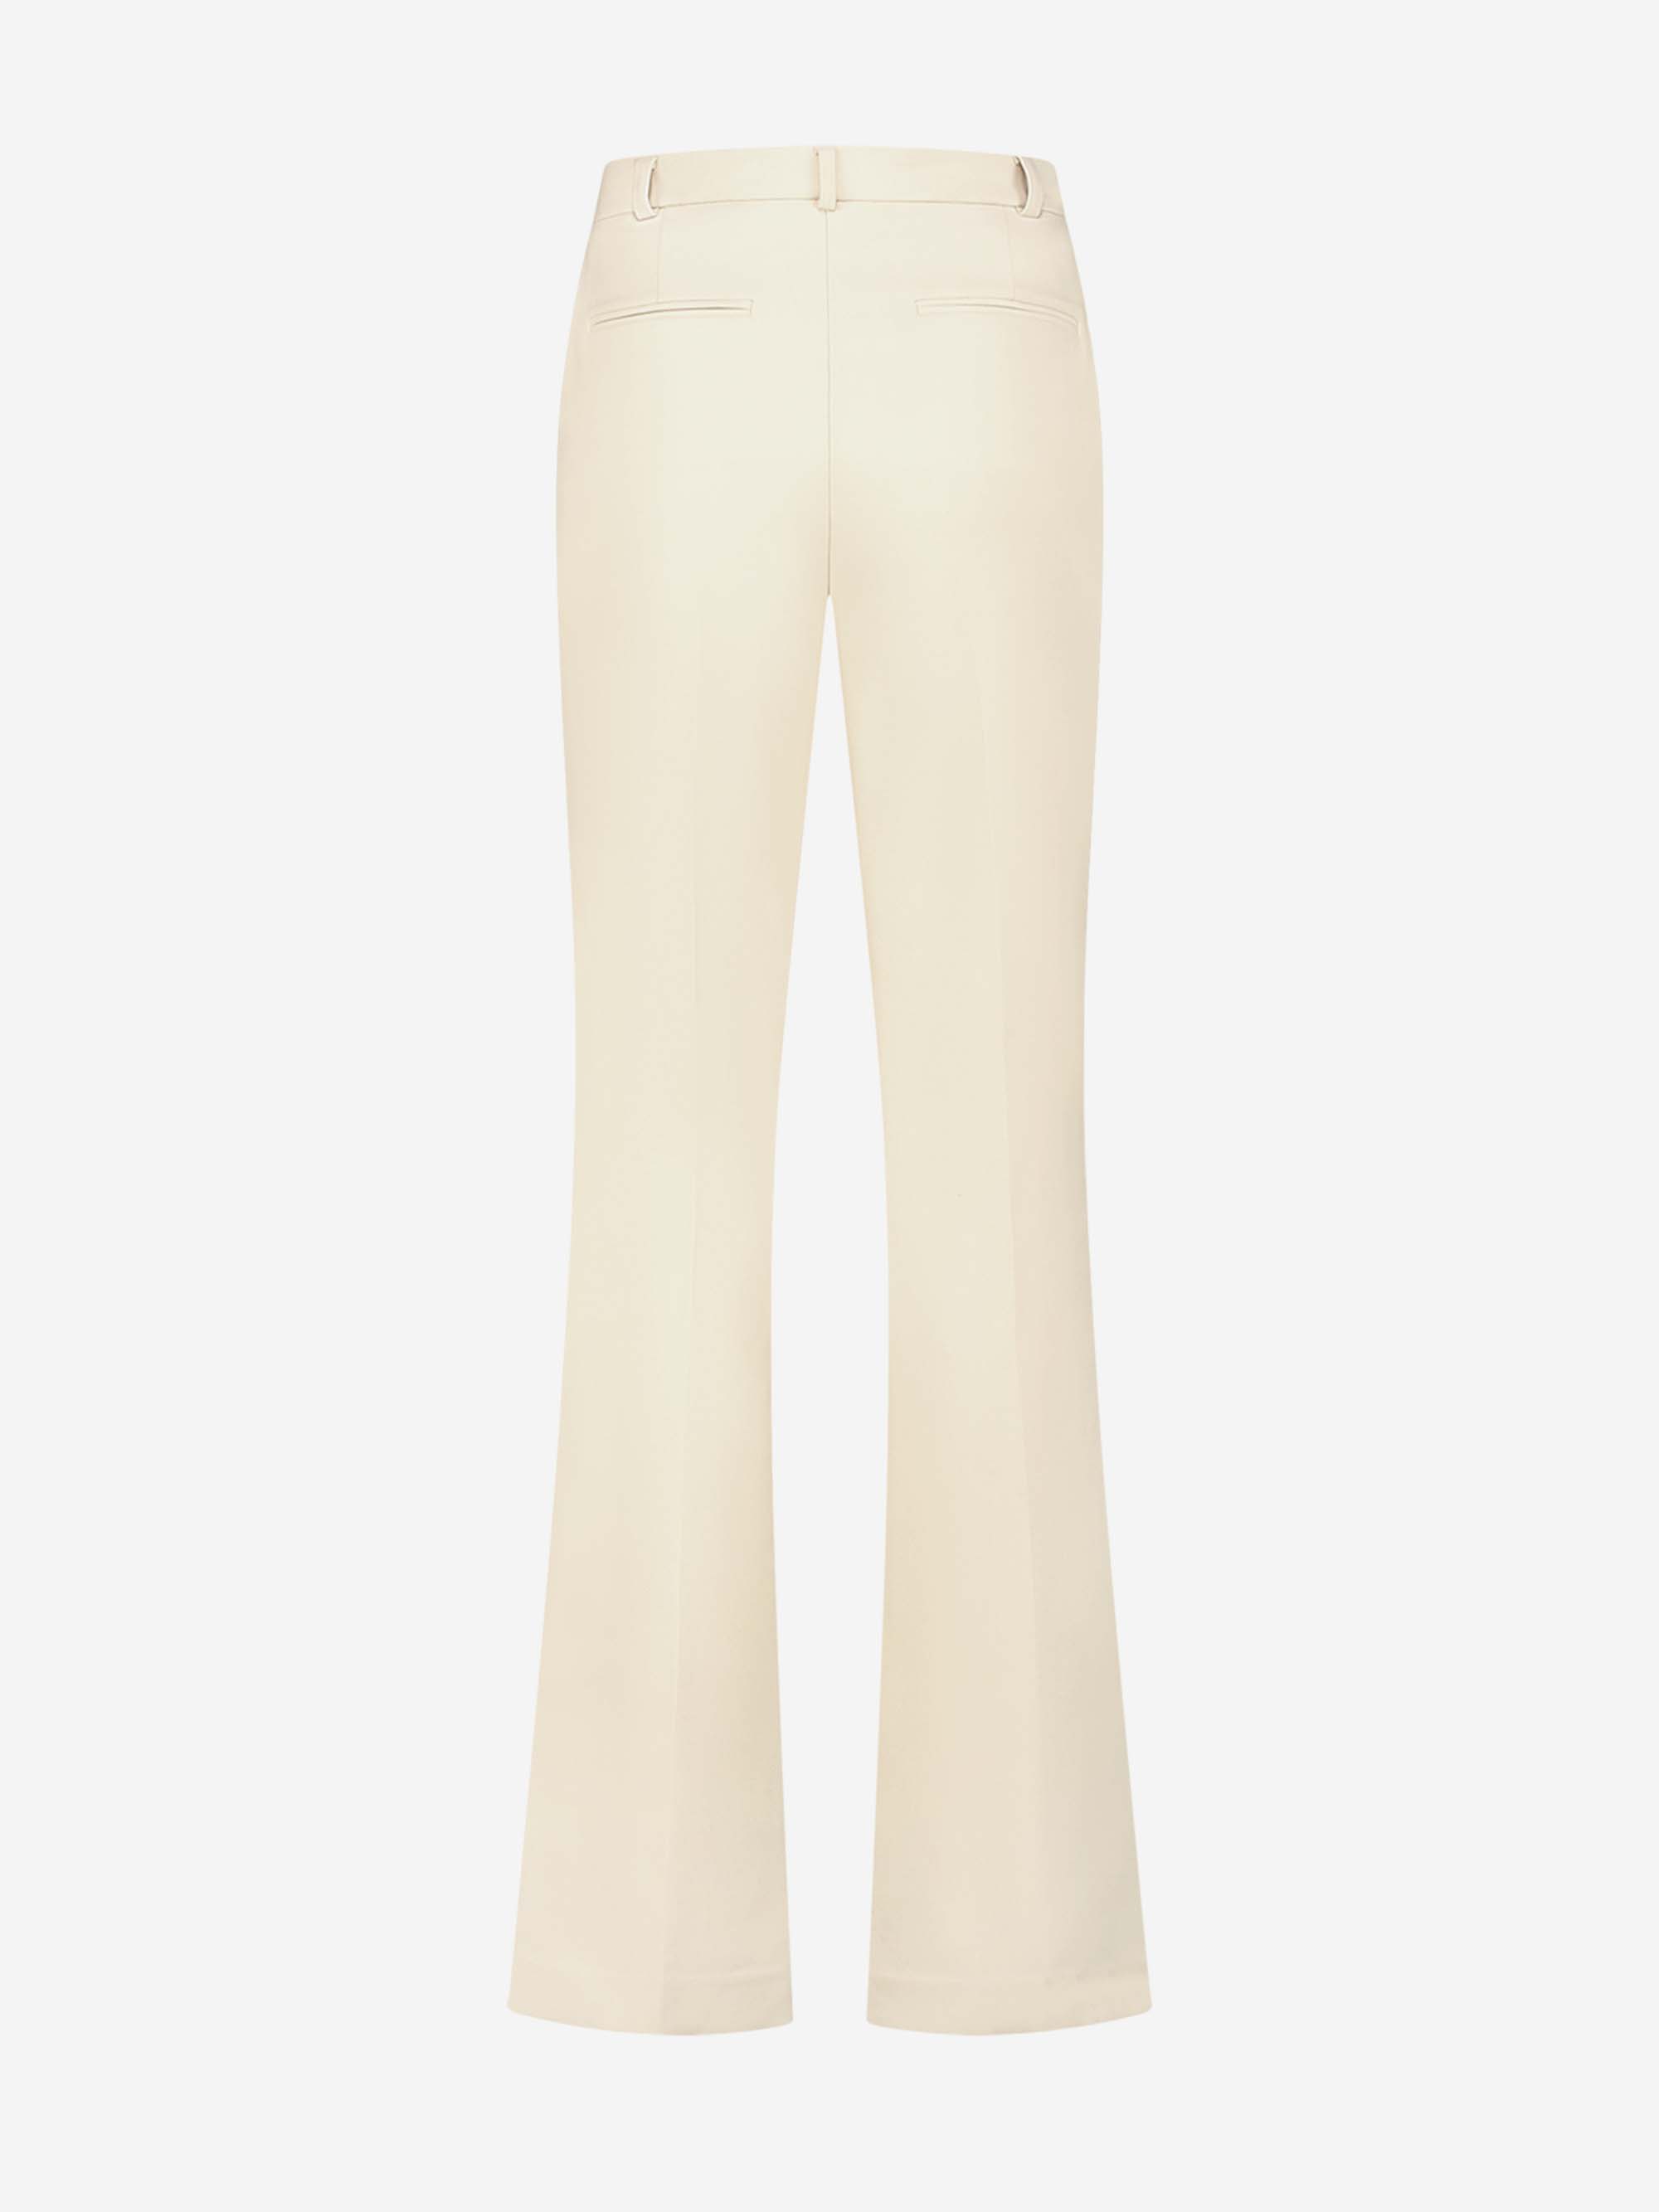 Neo Trousers